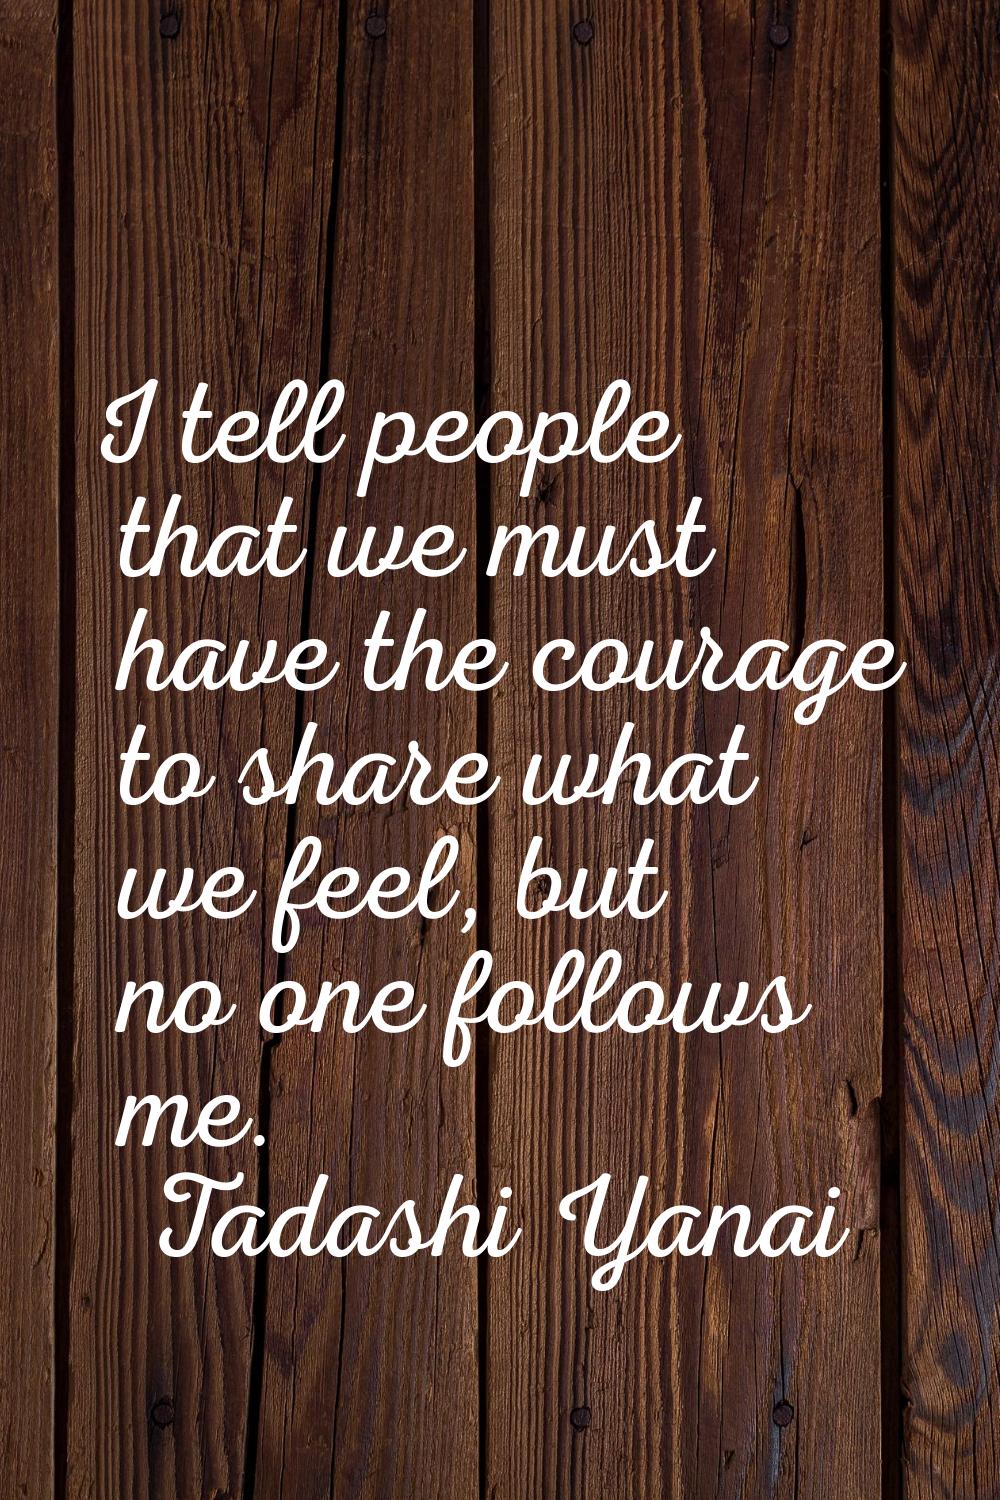 I tell people that we must have the courage to share what we feel, but no one follows me.